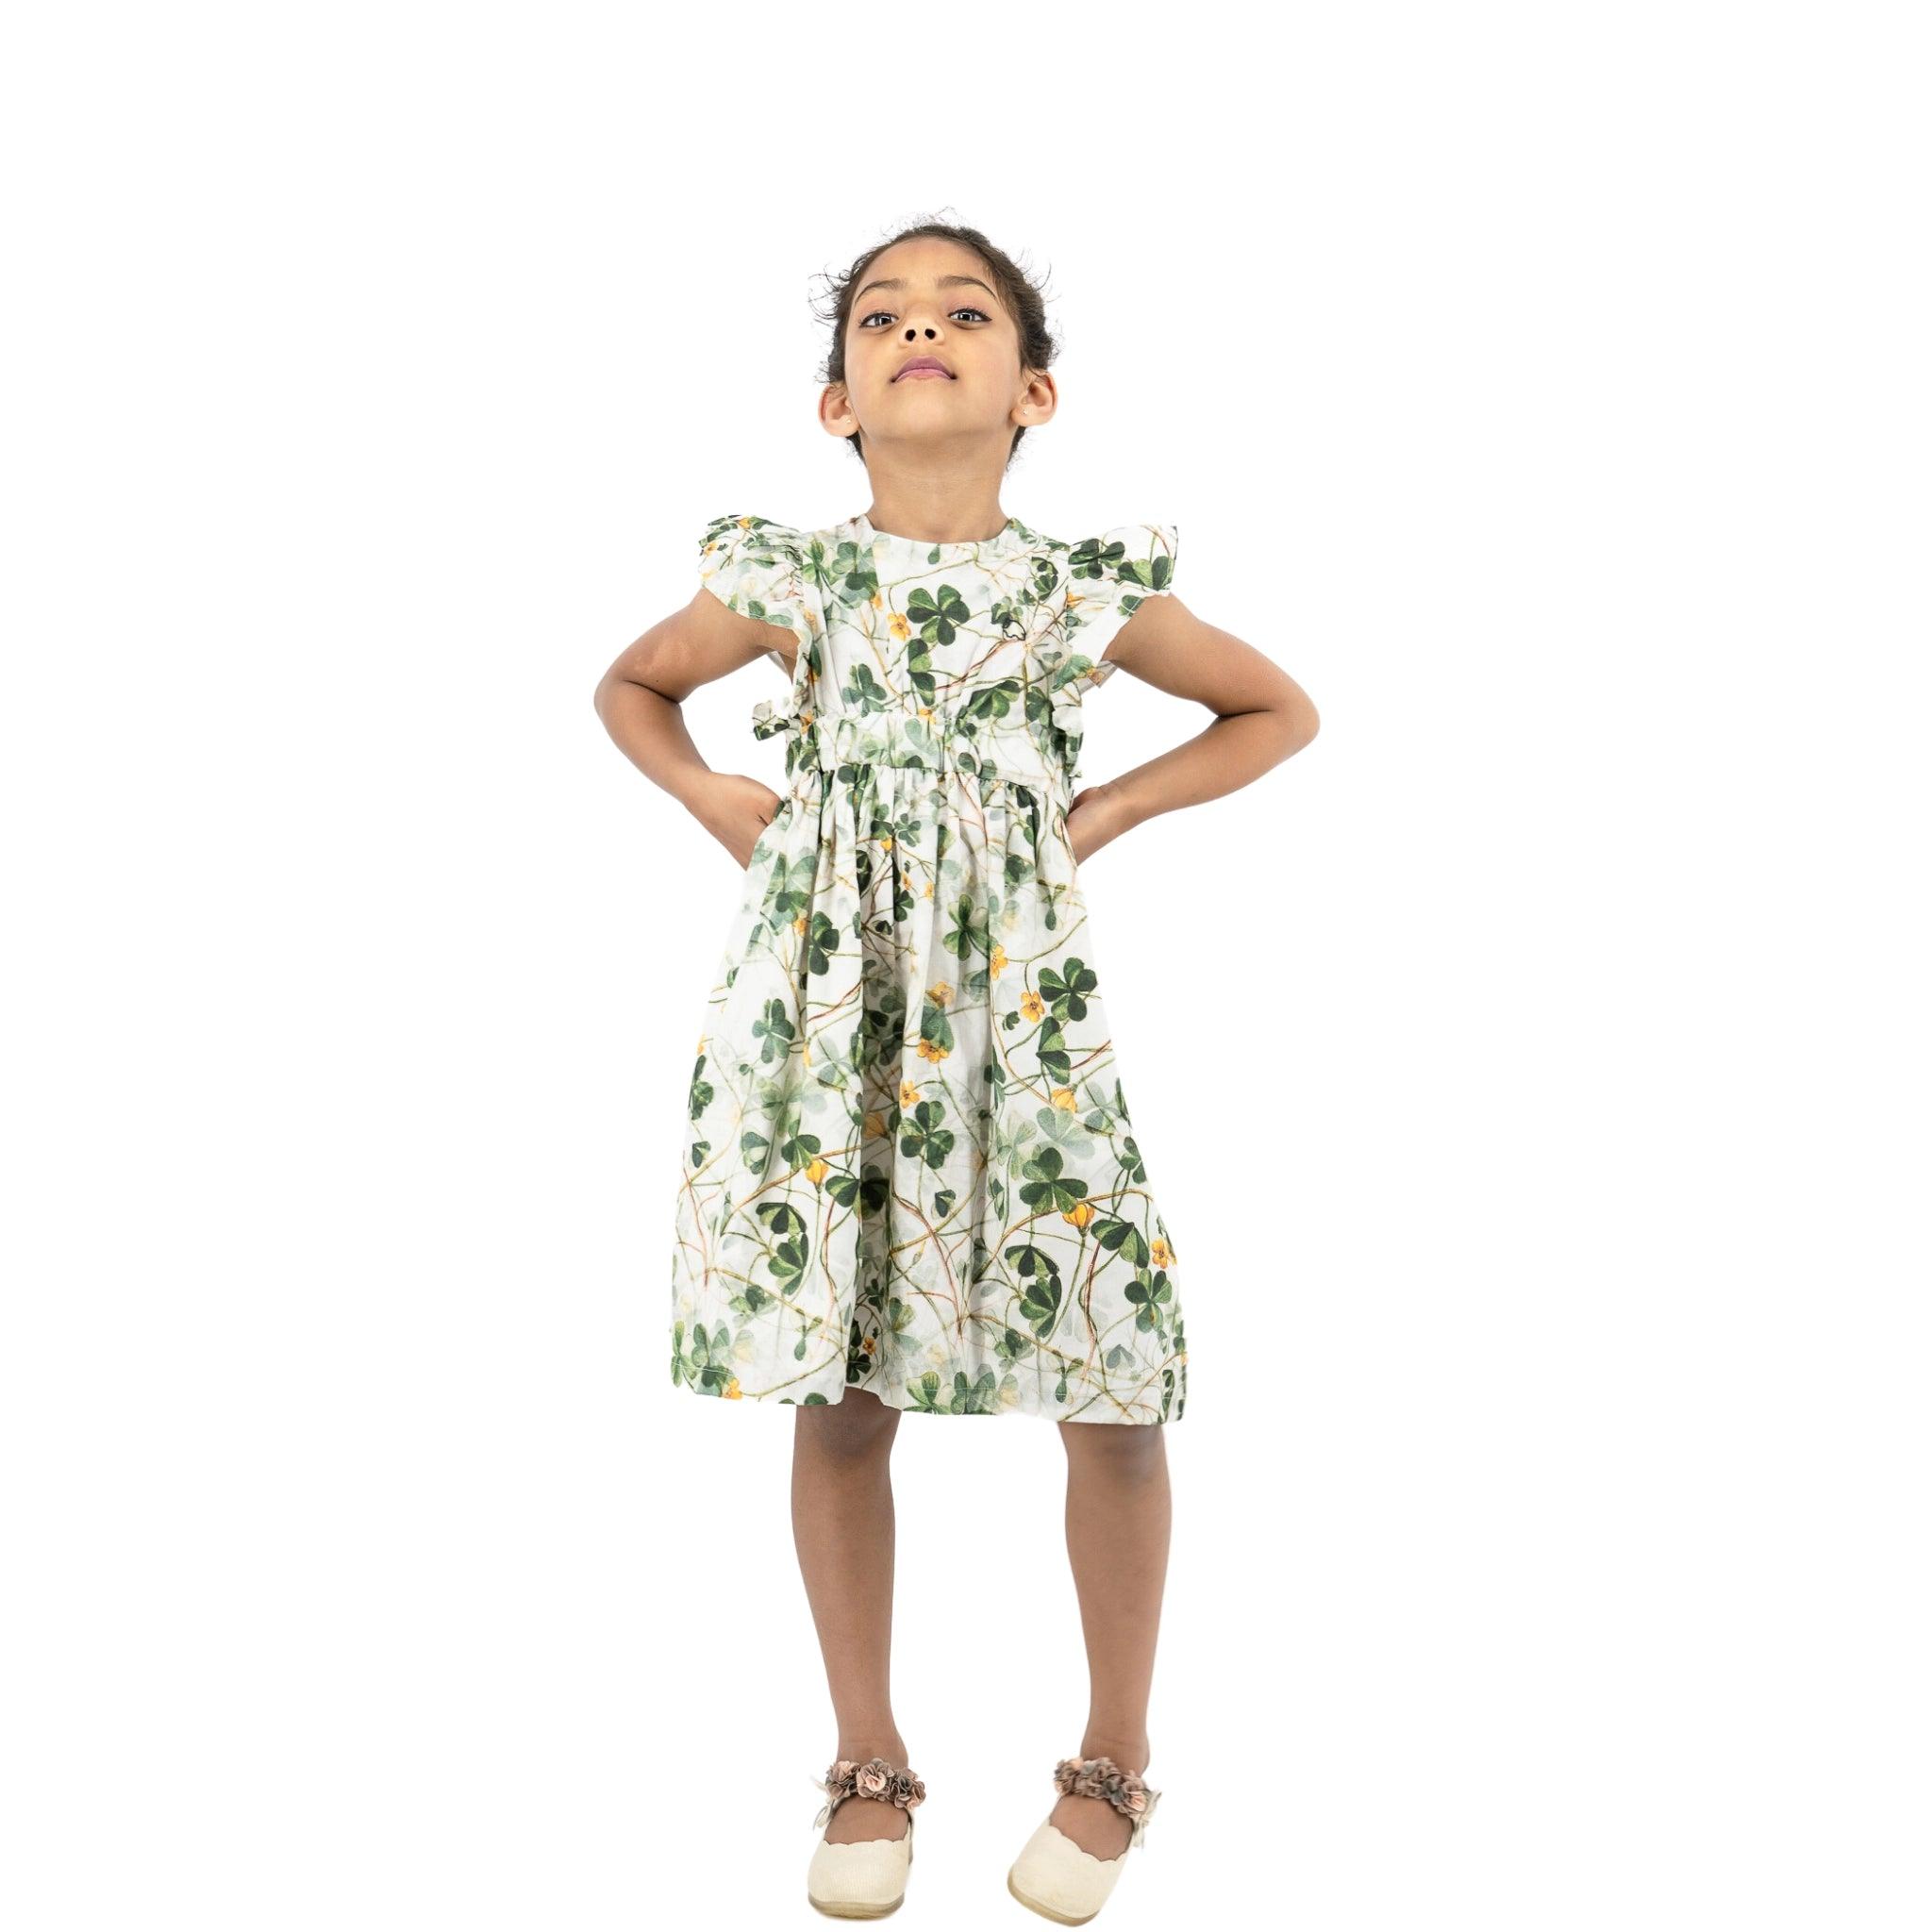 Young girl standing with hands on hips, wearing a Karee Green Floral Cotton Dress for Girls and looking confident, isolated on a white background.